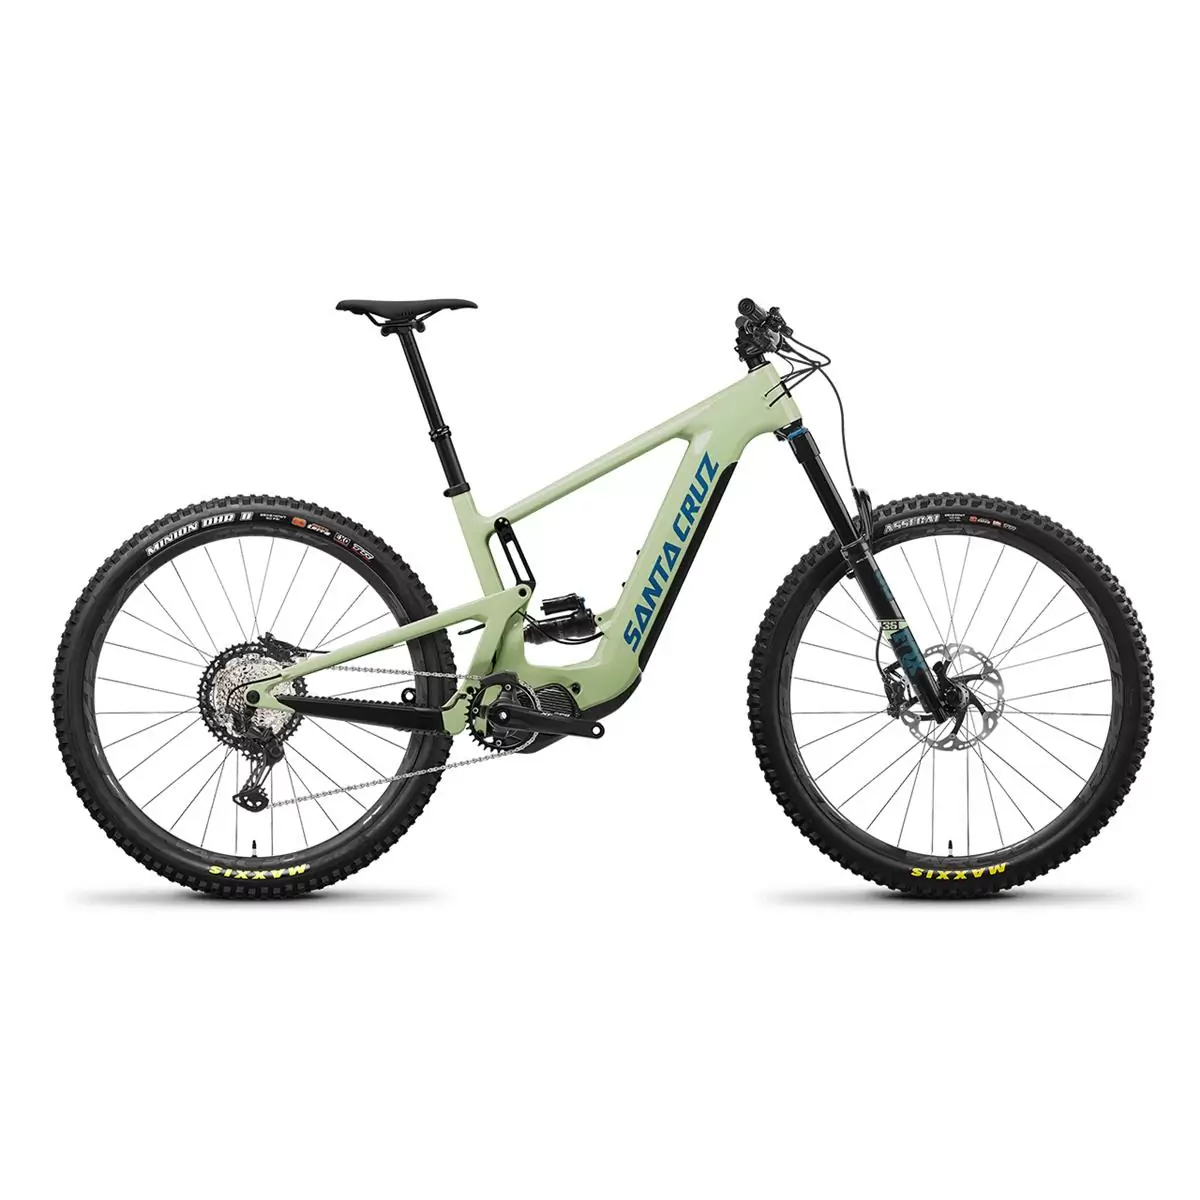 Heckler 9 C XT MX 29/27.5'' 160mm 12s 720Wh Shimano EP8 Verde Aguacate 2023 Talla M - image